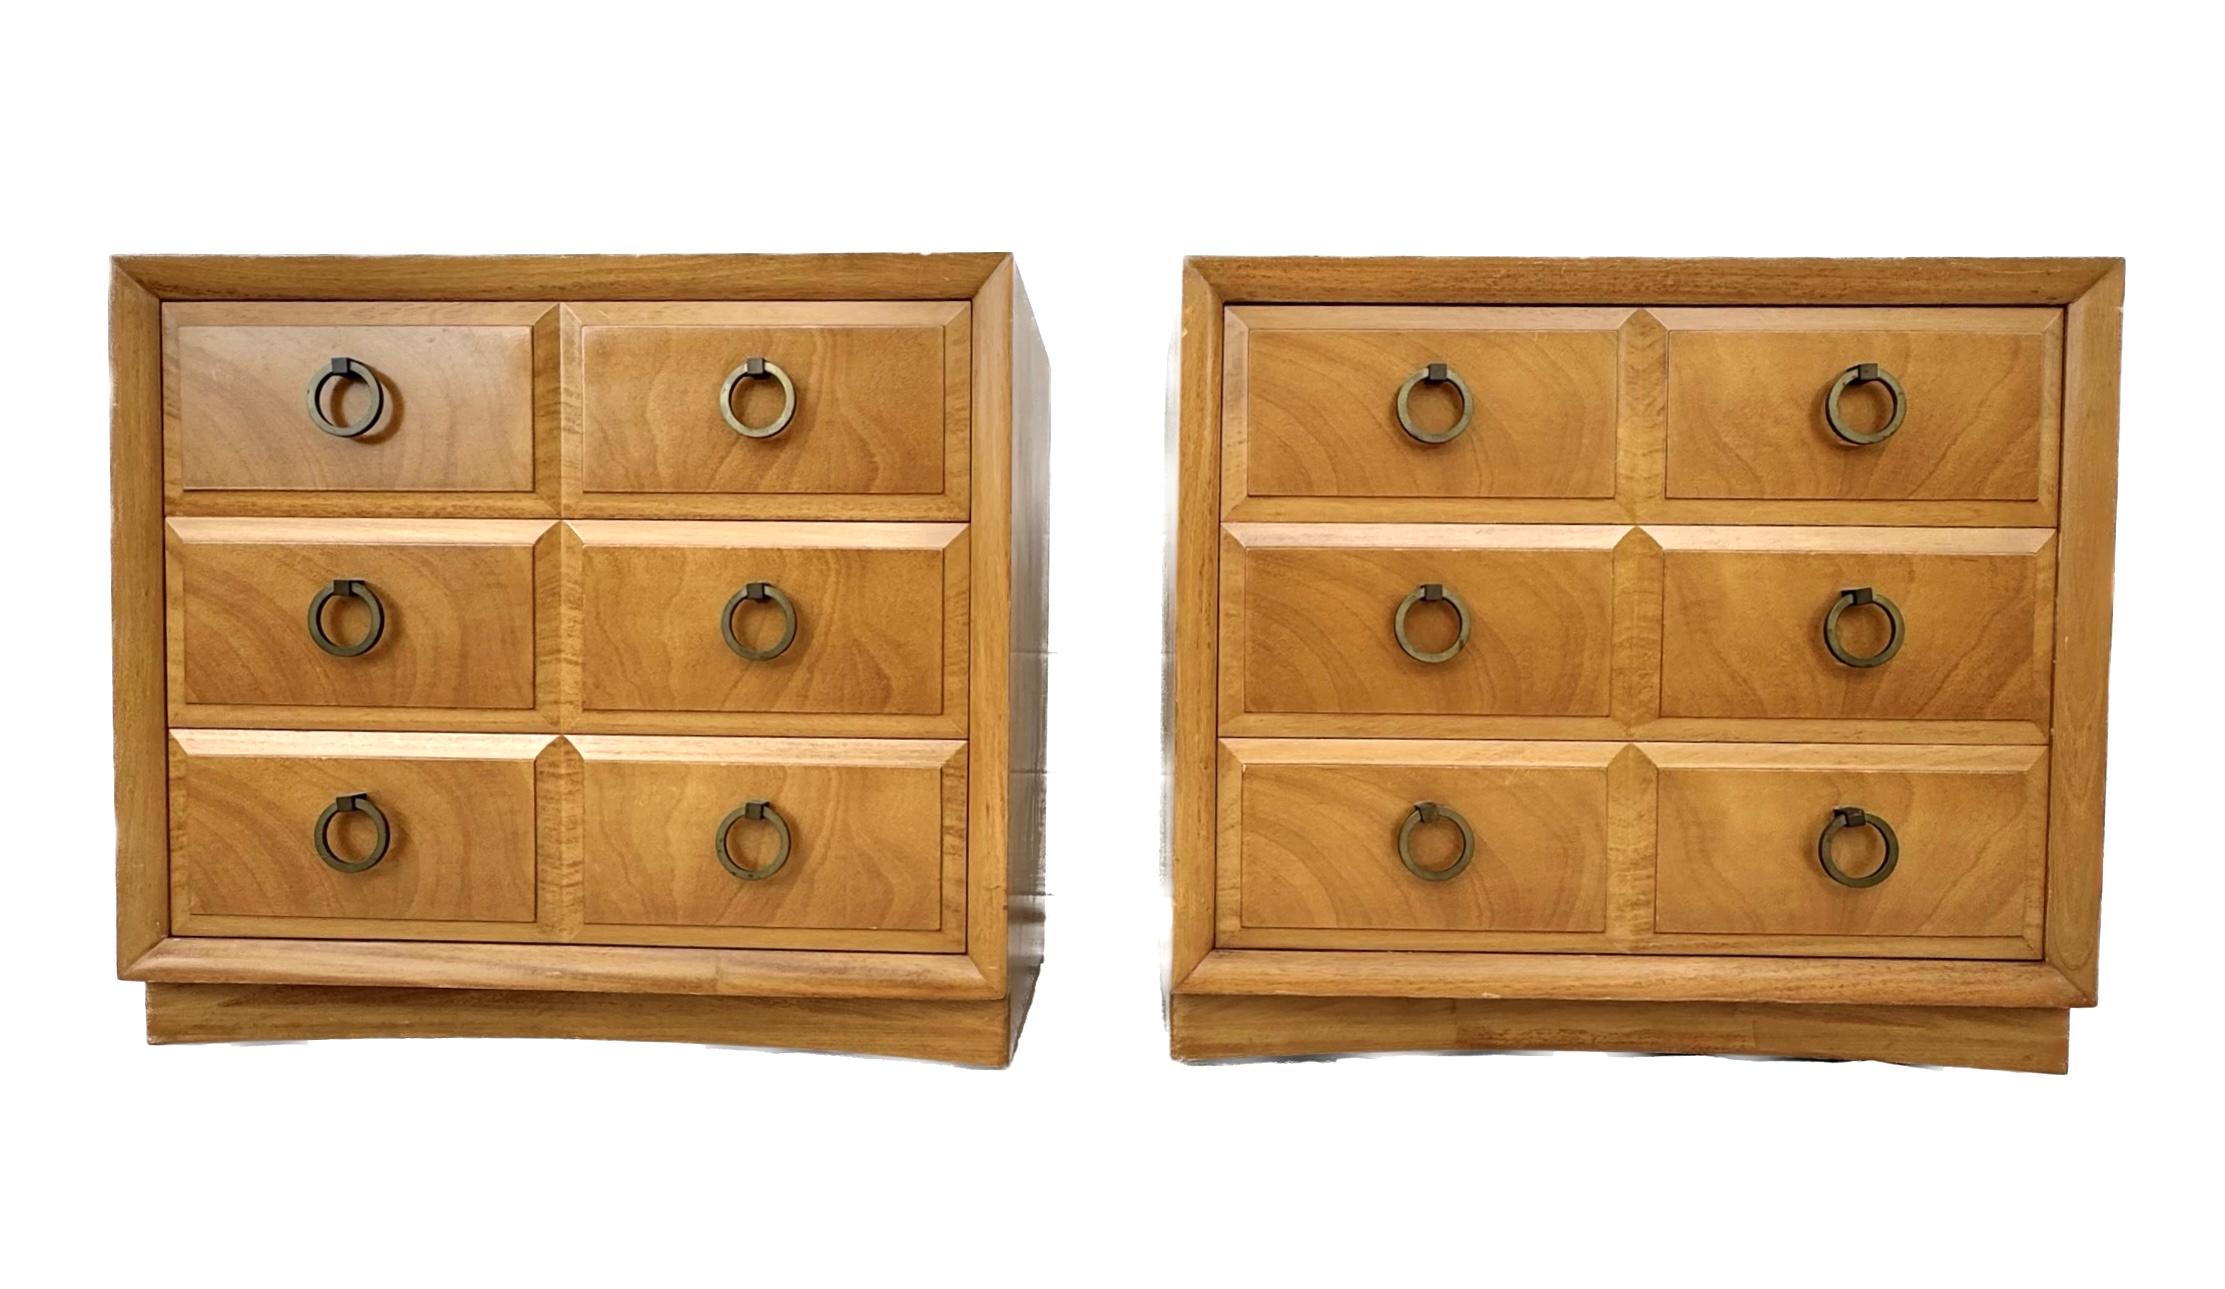 American T.H. Robsjohn-Gibbings Widdicomb Pair of Bedside Tables / Chests For Sale